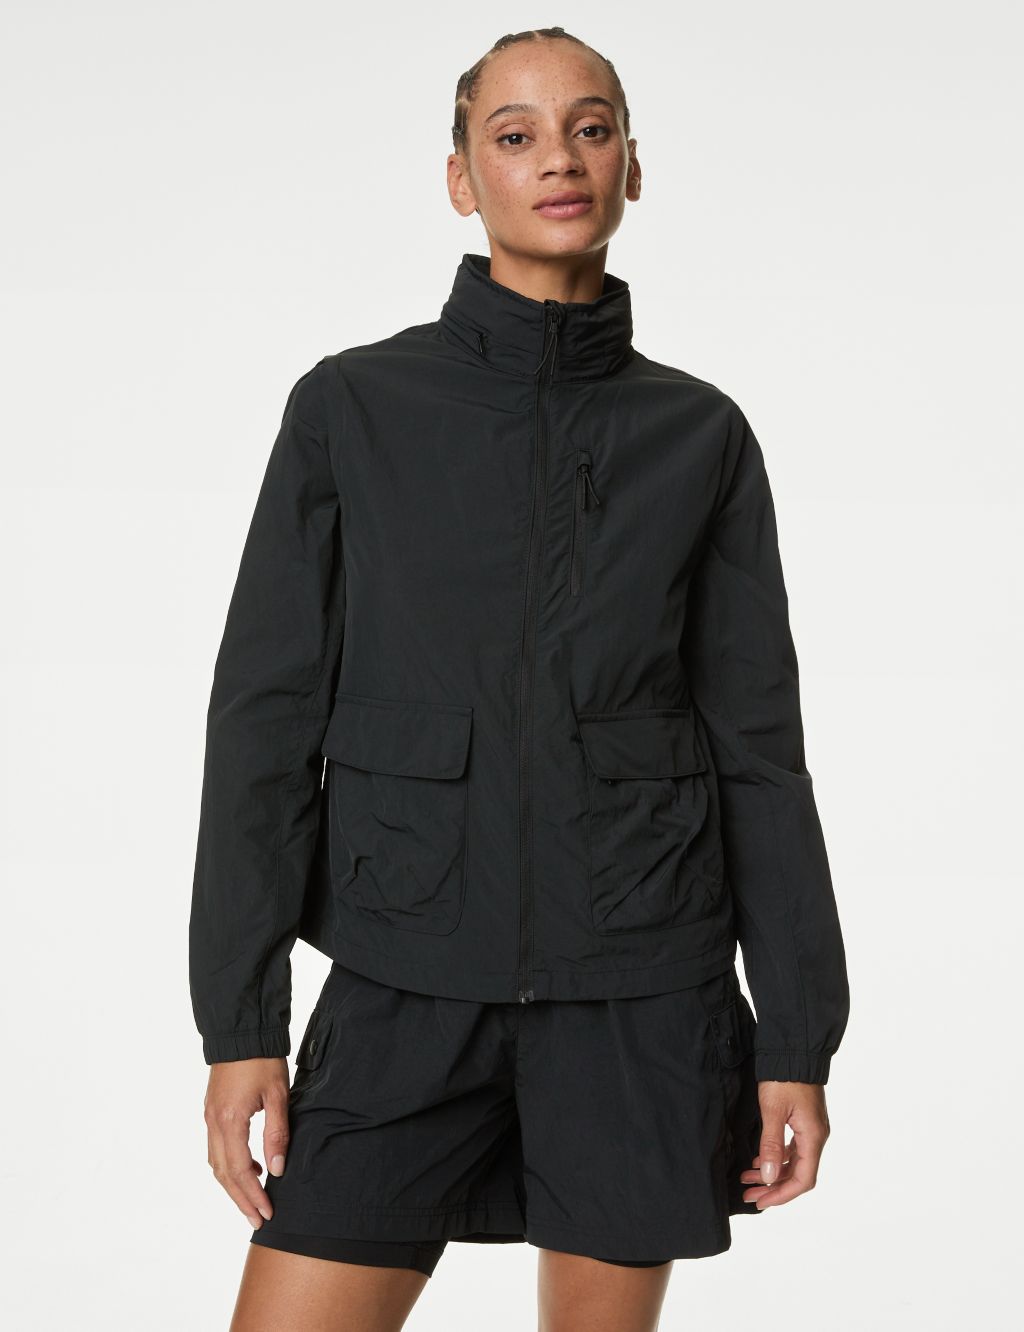 Convertible Sports Jacket with Stormwear™ 8 of 9